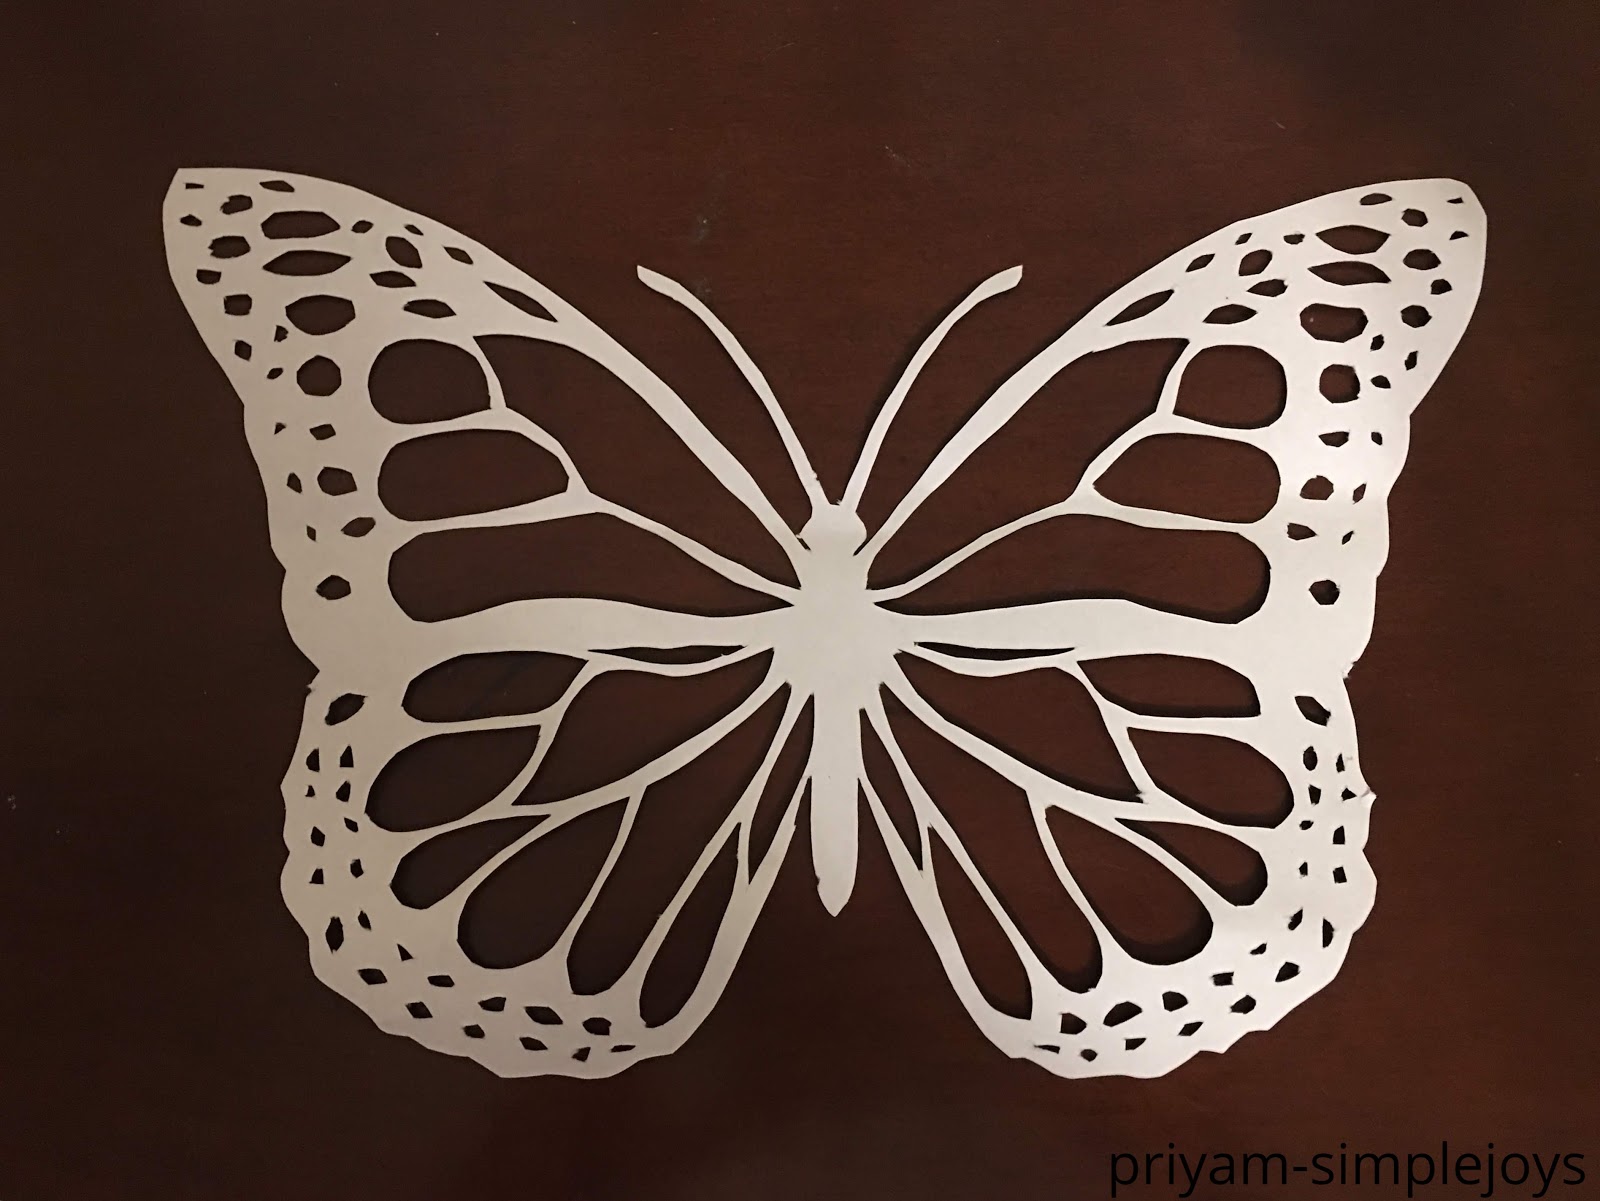 Download SimpleJoys: Paper Cut Butterfly.